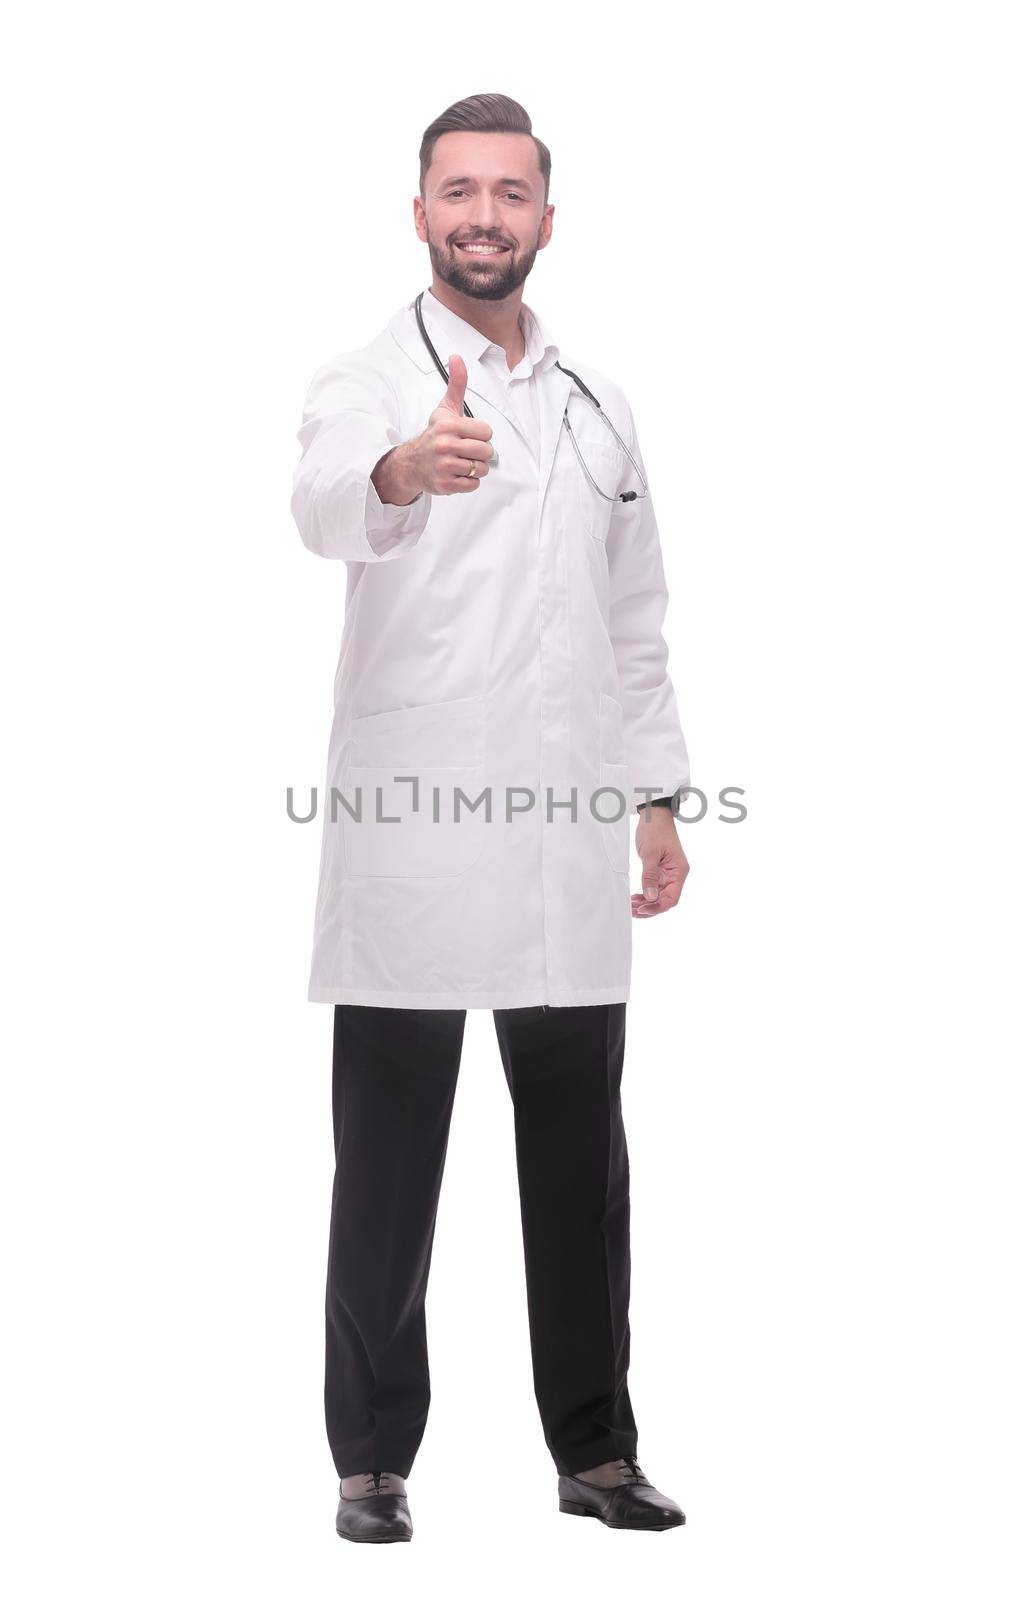 in full growth. smiling medical professional showing thumbs up .isolated on white background